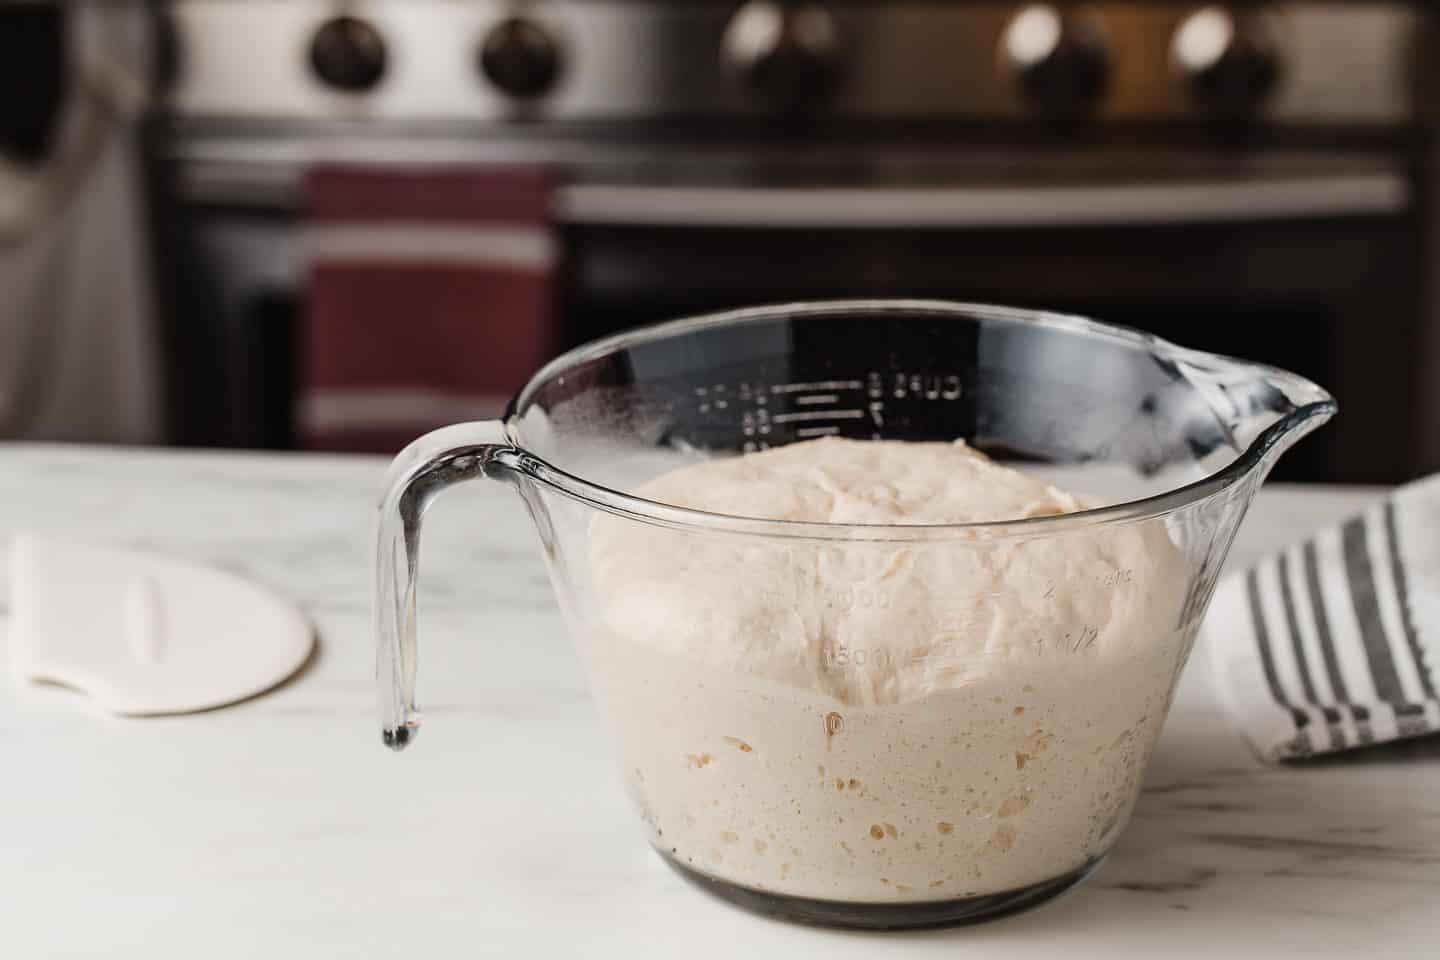 A bowl of fermented dough on a kitchen counter.